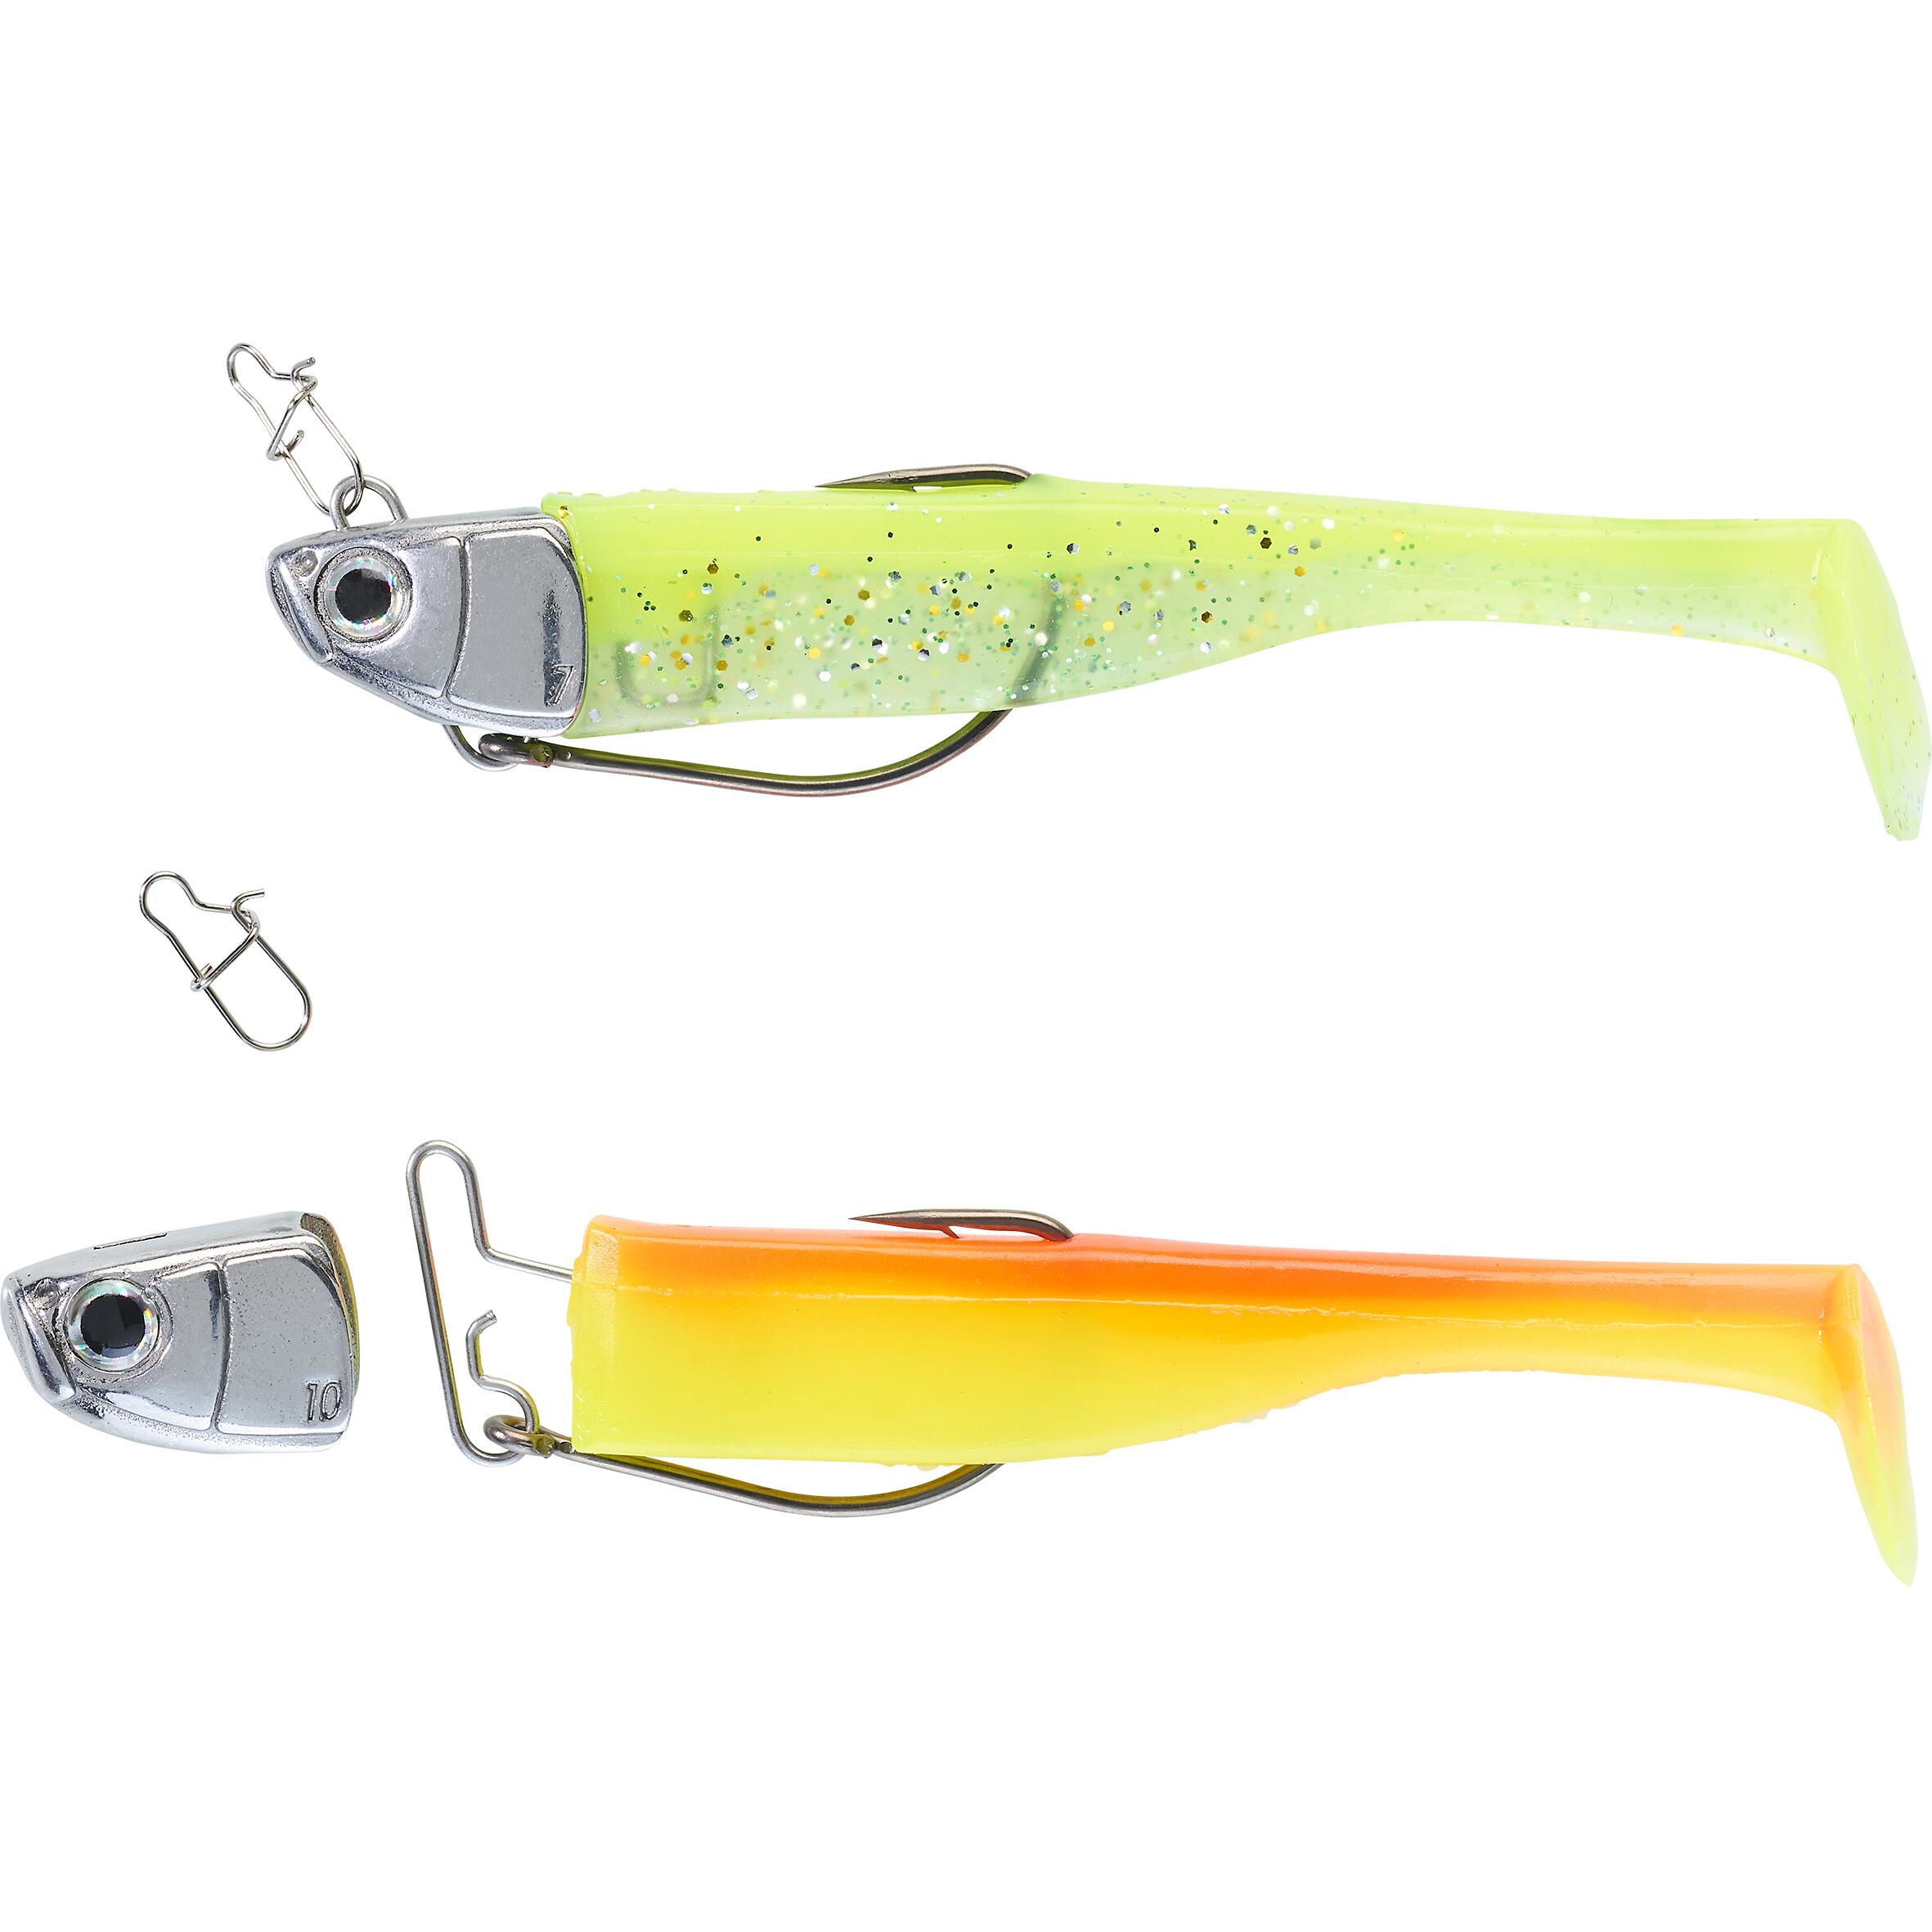 Shadow Jigs Lures  Fishing Lures - Jigs Lures Hooks 40/60